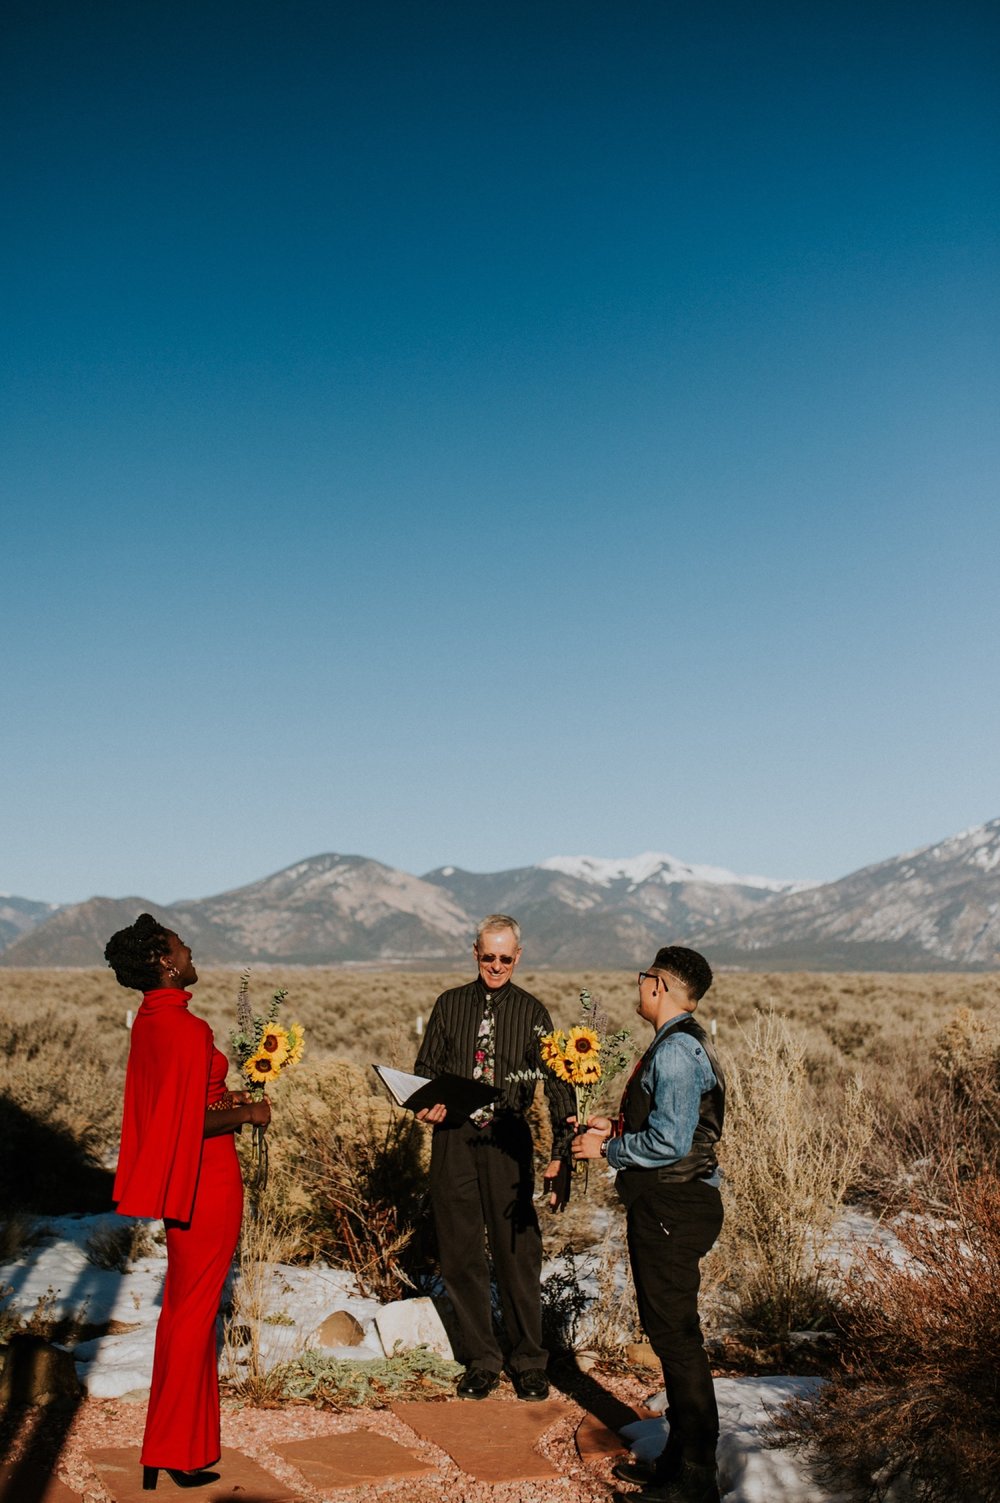  SO excited to share B + E’s gorgeous l winter elopement in Taos, New Mexico. Their outfits were a hodgepodge of things B + E already owned, homemade accessories, vintage hand me downs, and contemporary pieces they bought special for their big day. W